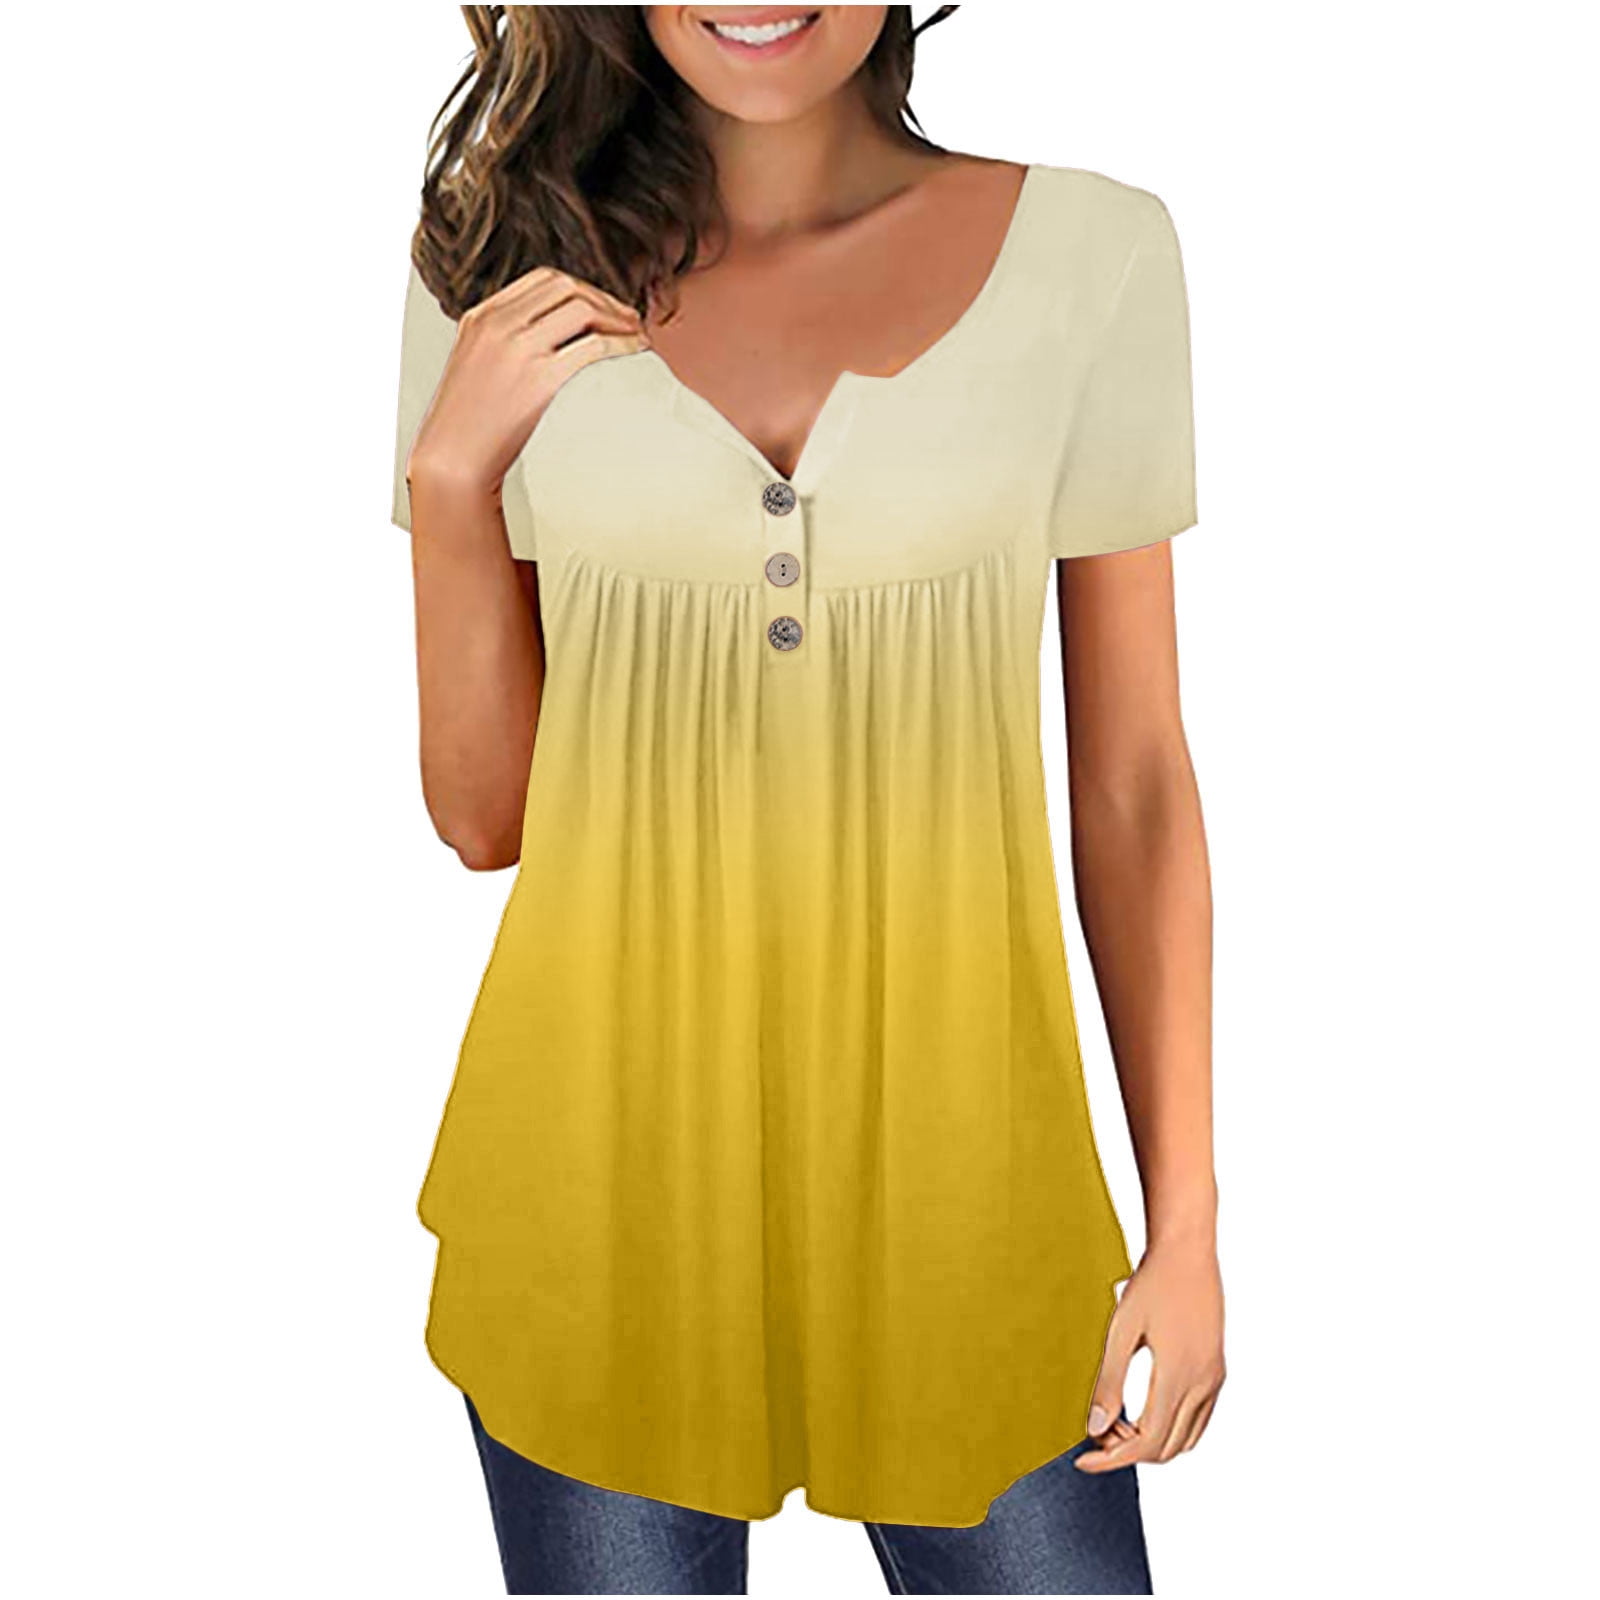  3/4 Length Sleeve Womens Tops Hide Belly Fat Shirts